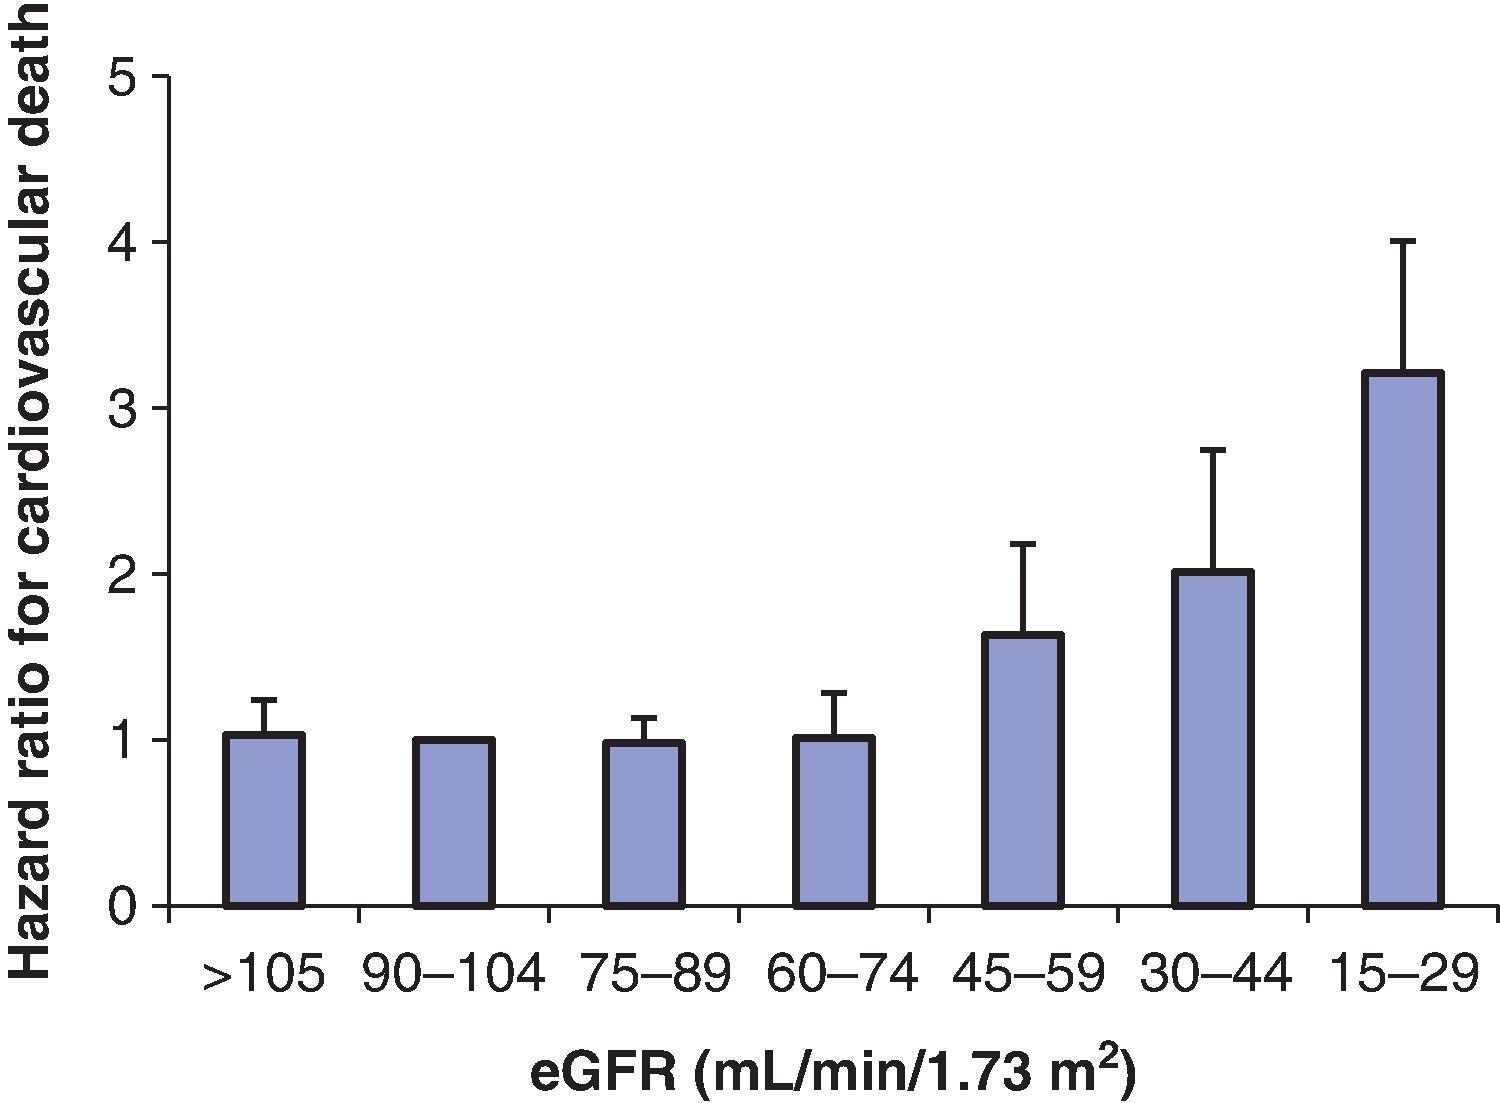 Fig. 54.1, Hazard ratios for cardiovascular events according to the baseline estimated glomerular filtration rate (eGFR). Adjusted for age, sex, race, cardiovascular disease history, smoking status, diabetes mellitus, systolic blood pressure, serum total cholesterol, and urine albumin-to-creatinine ratio. (Plotted with data from van der Velde M, Matsushita K, Coresh J, et al. Lower estimated glomerular filtration rate and higher albuminuria are associated with all-cause and cardiovascular mortality. A collaborative meta-analysis of high-risk population cohorts. Kidney Int. 2011;79:1341–1352.)